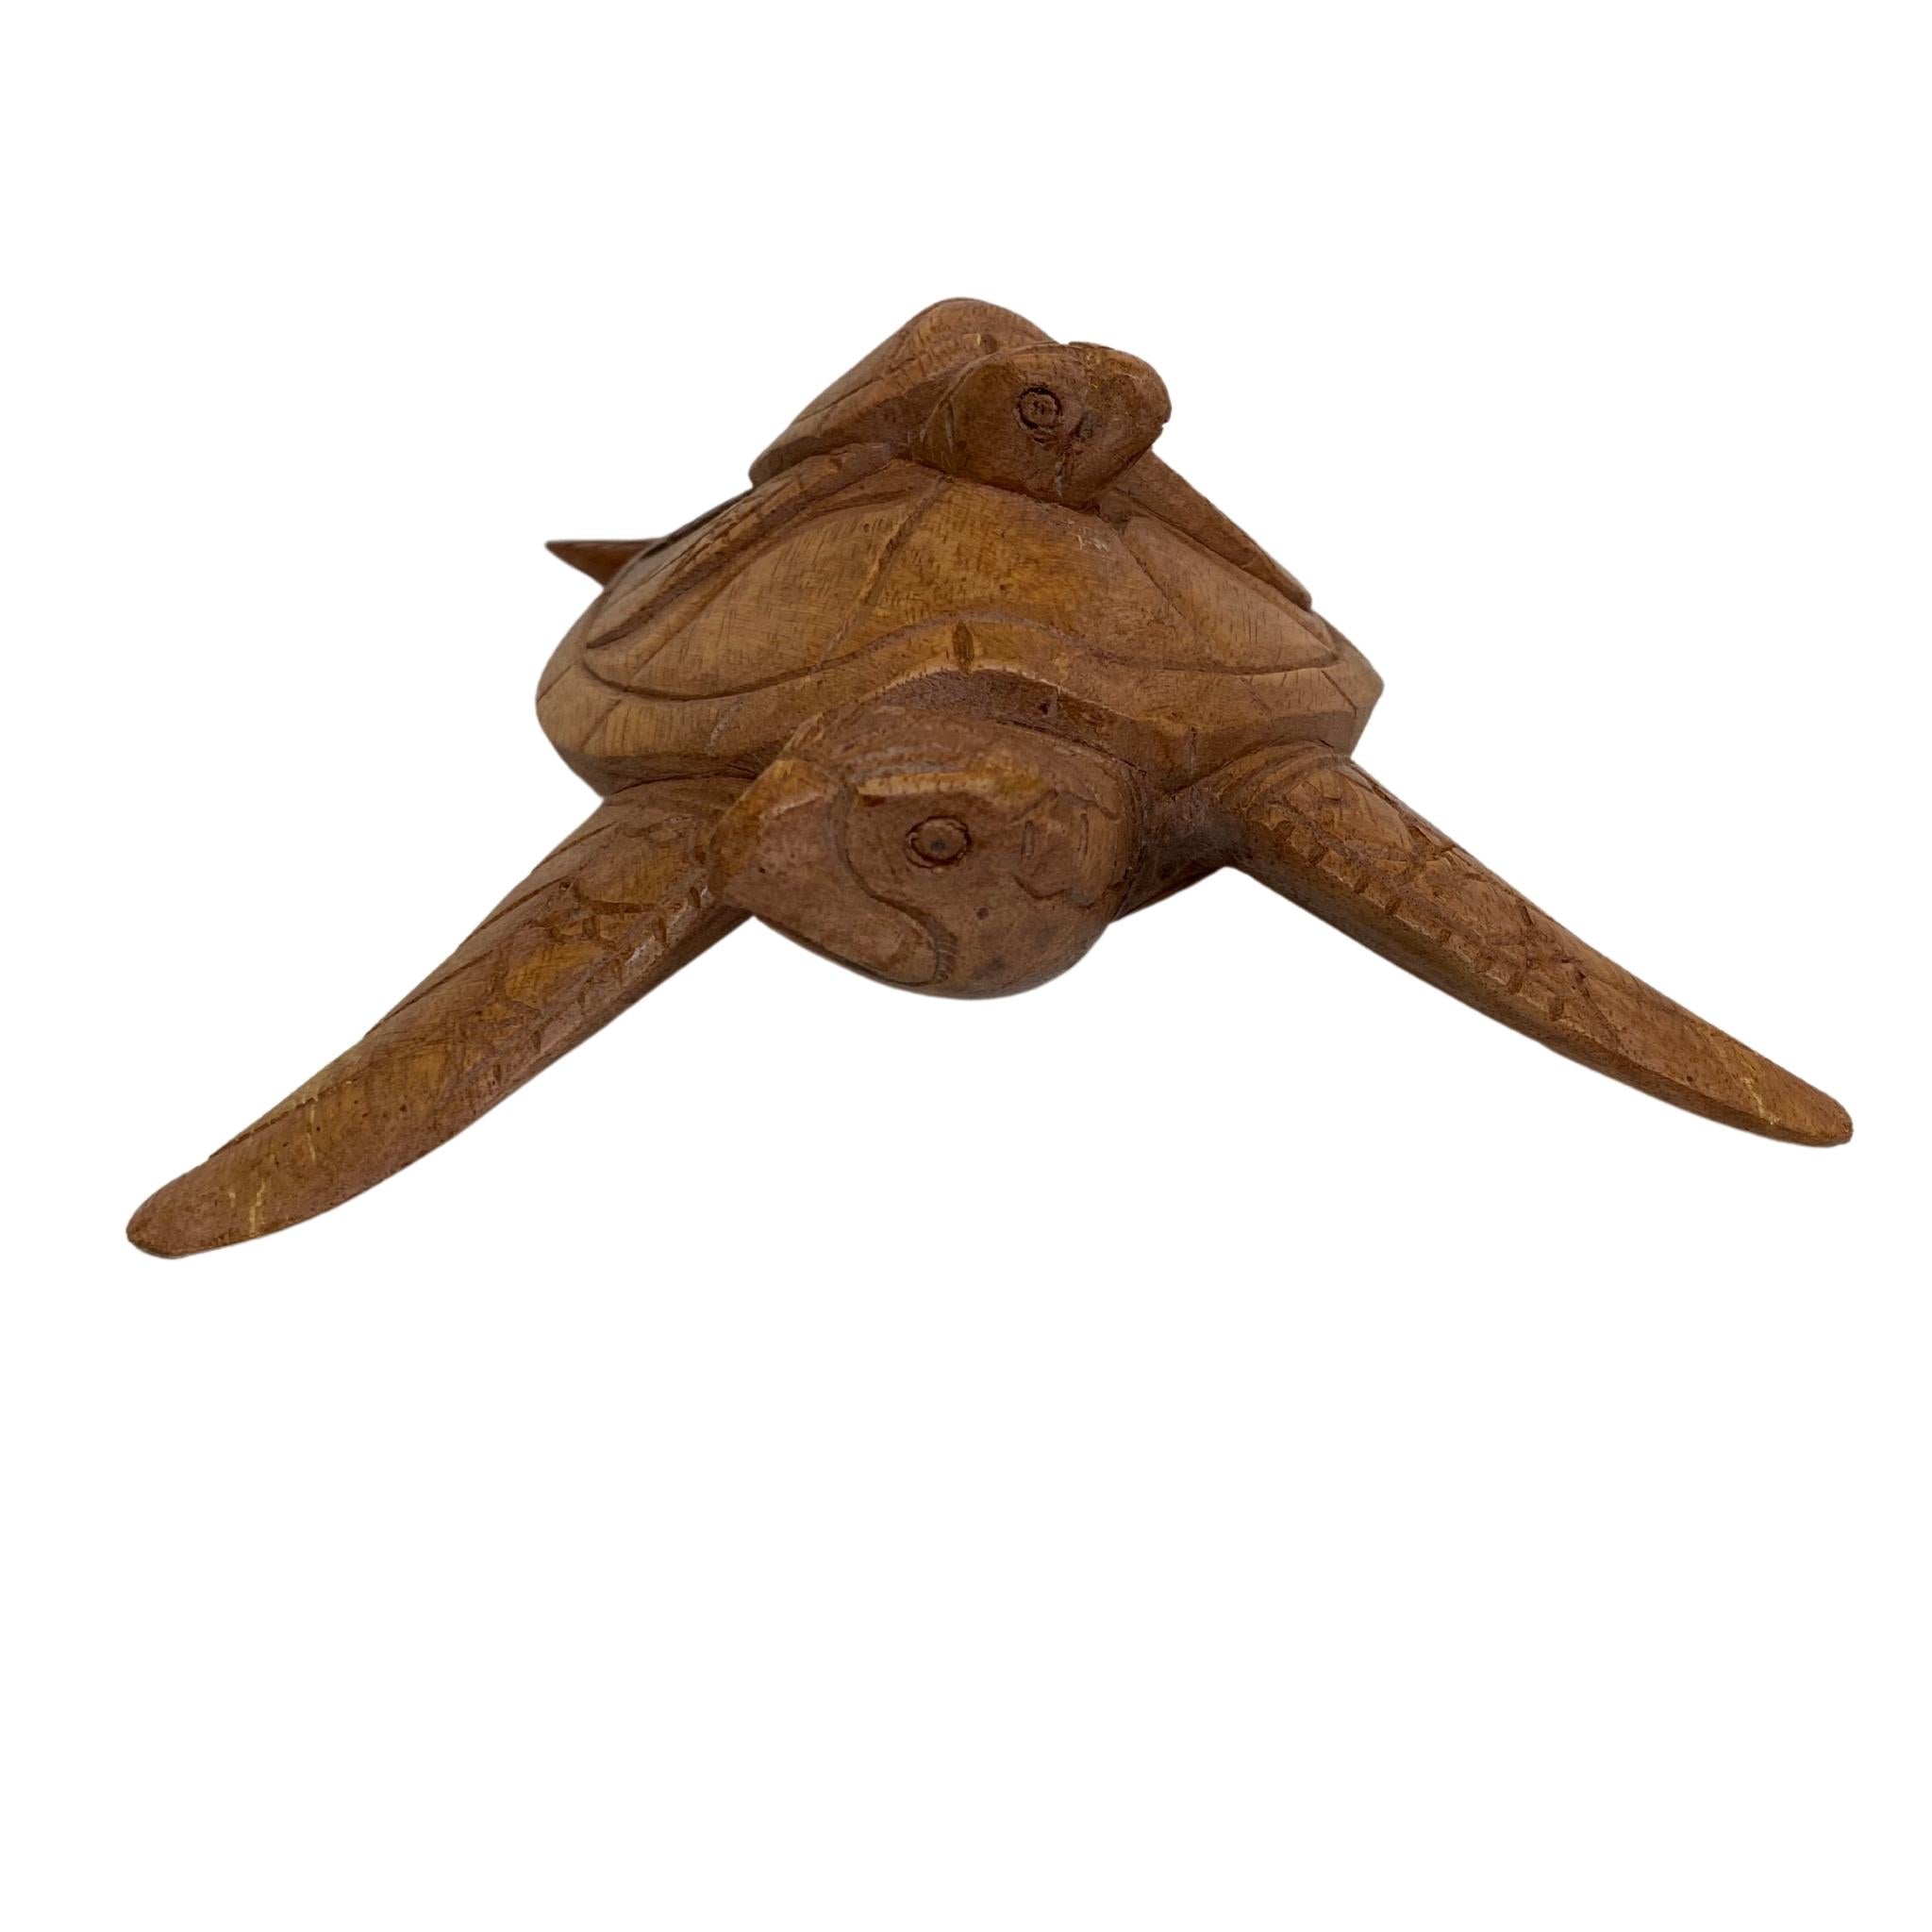 Wood Sea Turtle Sculpture from Bali, Turtle Mother with Baby on Back Sculpture Solid Wood Wooden Tortoise Home Decor Sculpture Statue Hand Carved Figurine - Tobmarc Home Decor & Gifts 